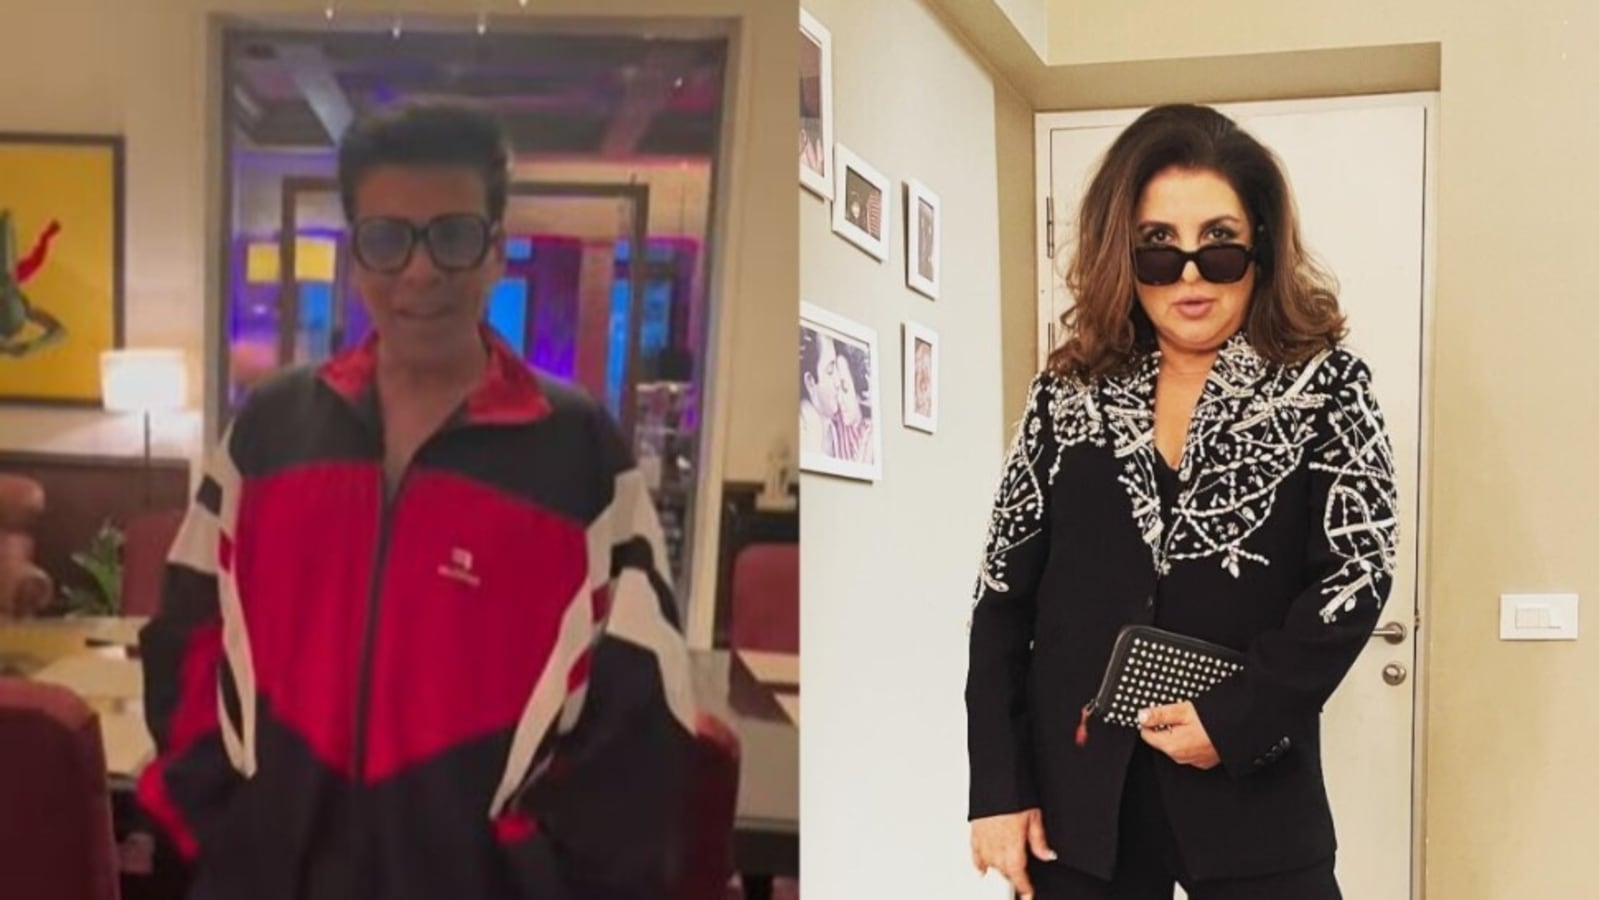 Karan Johar roasts Farah Khan saying she’s ‘looking slimmer and earth is flat’. Here’s how she responded